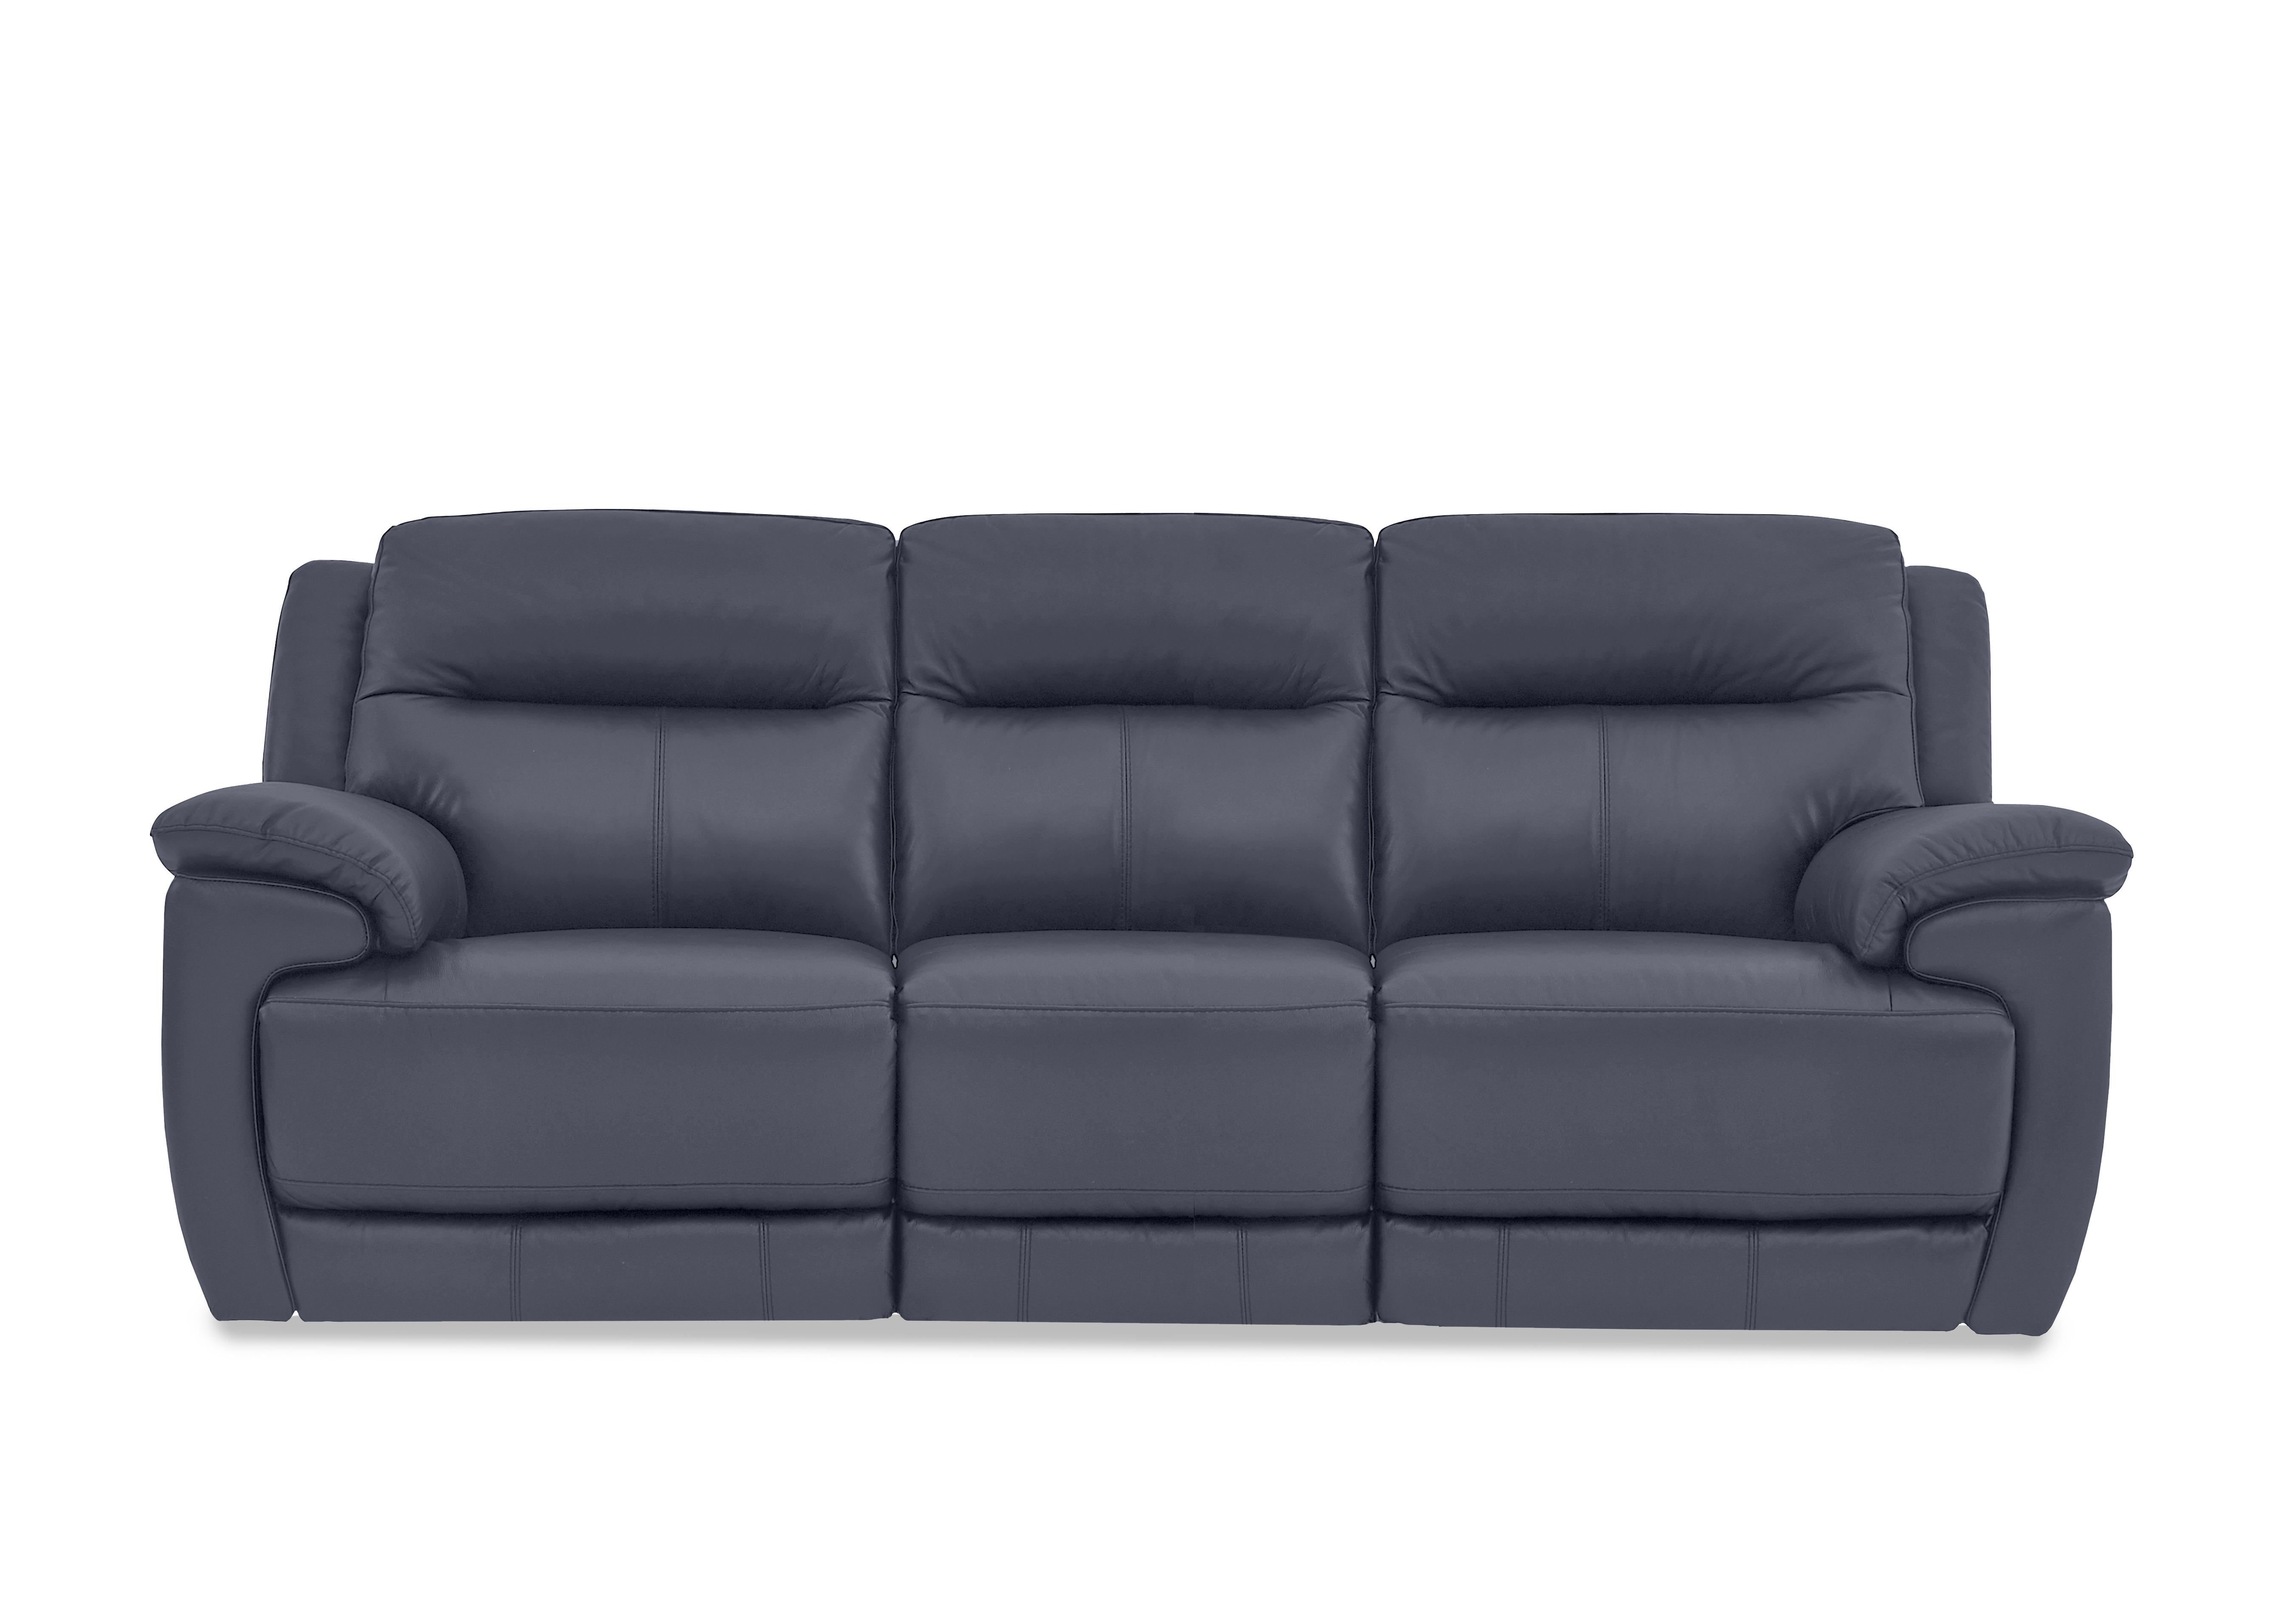 Touch 3 Seater Leather Sofa in Bv-313e Ocean Blue on Furniture Village